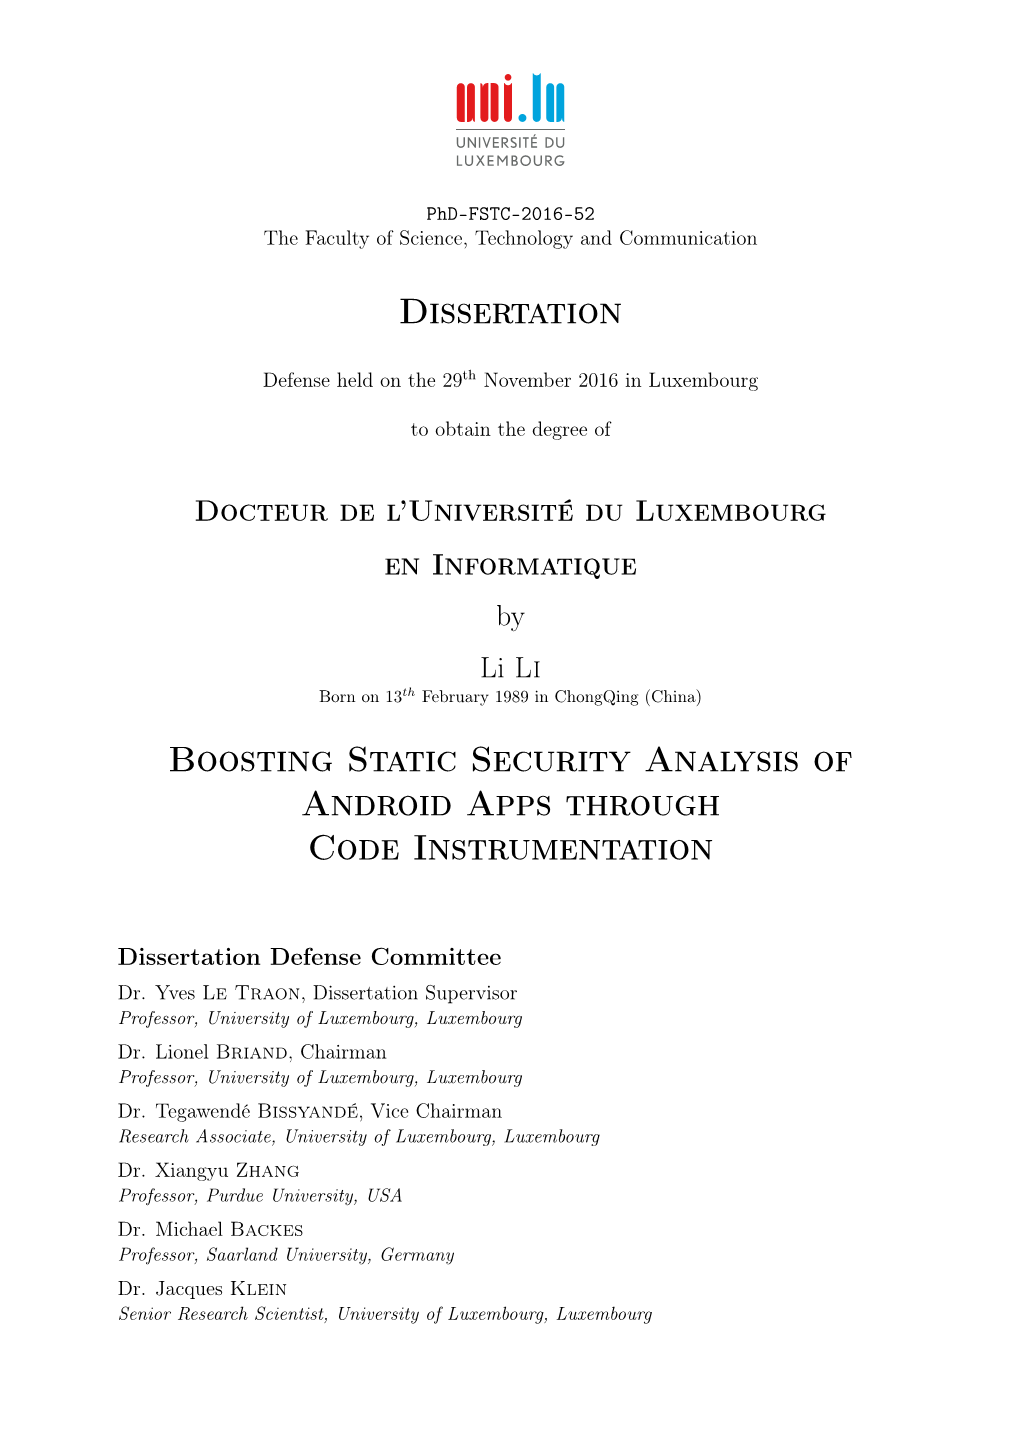 Dissertation Boosting Static Security Analysis of Android Apps Through Code Instrumentation